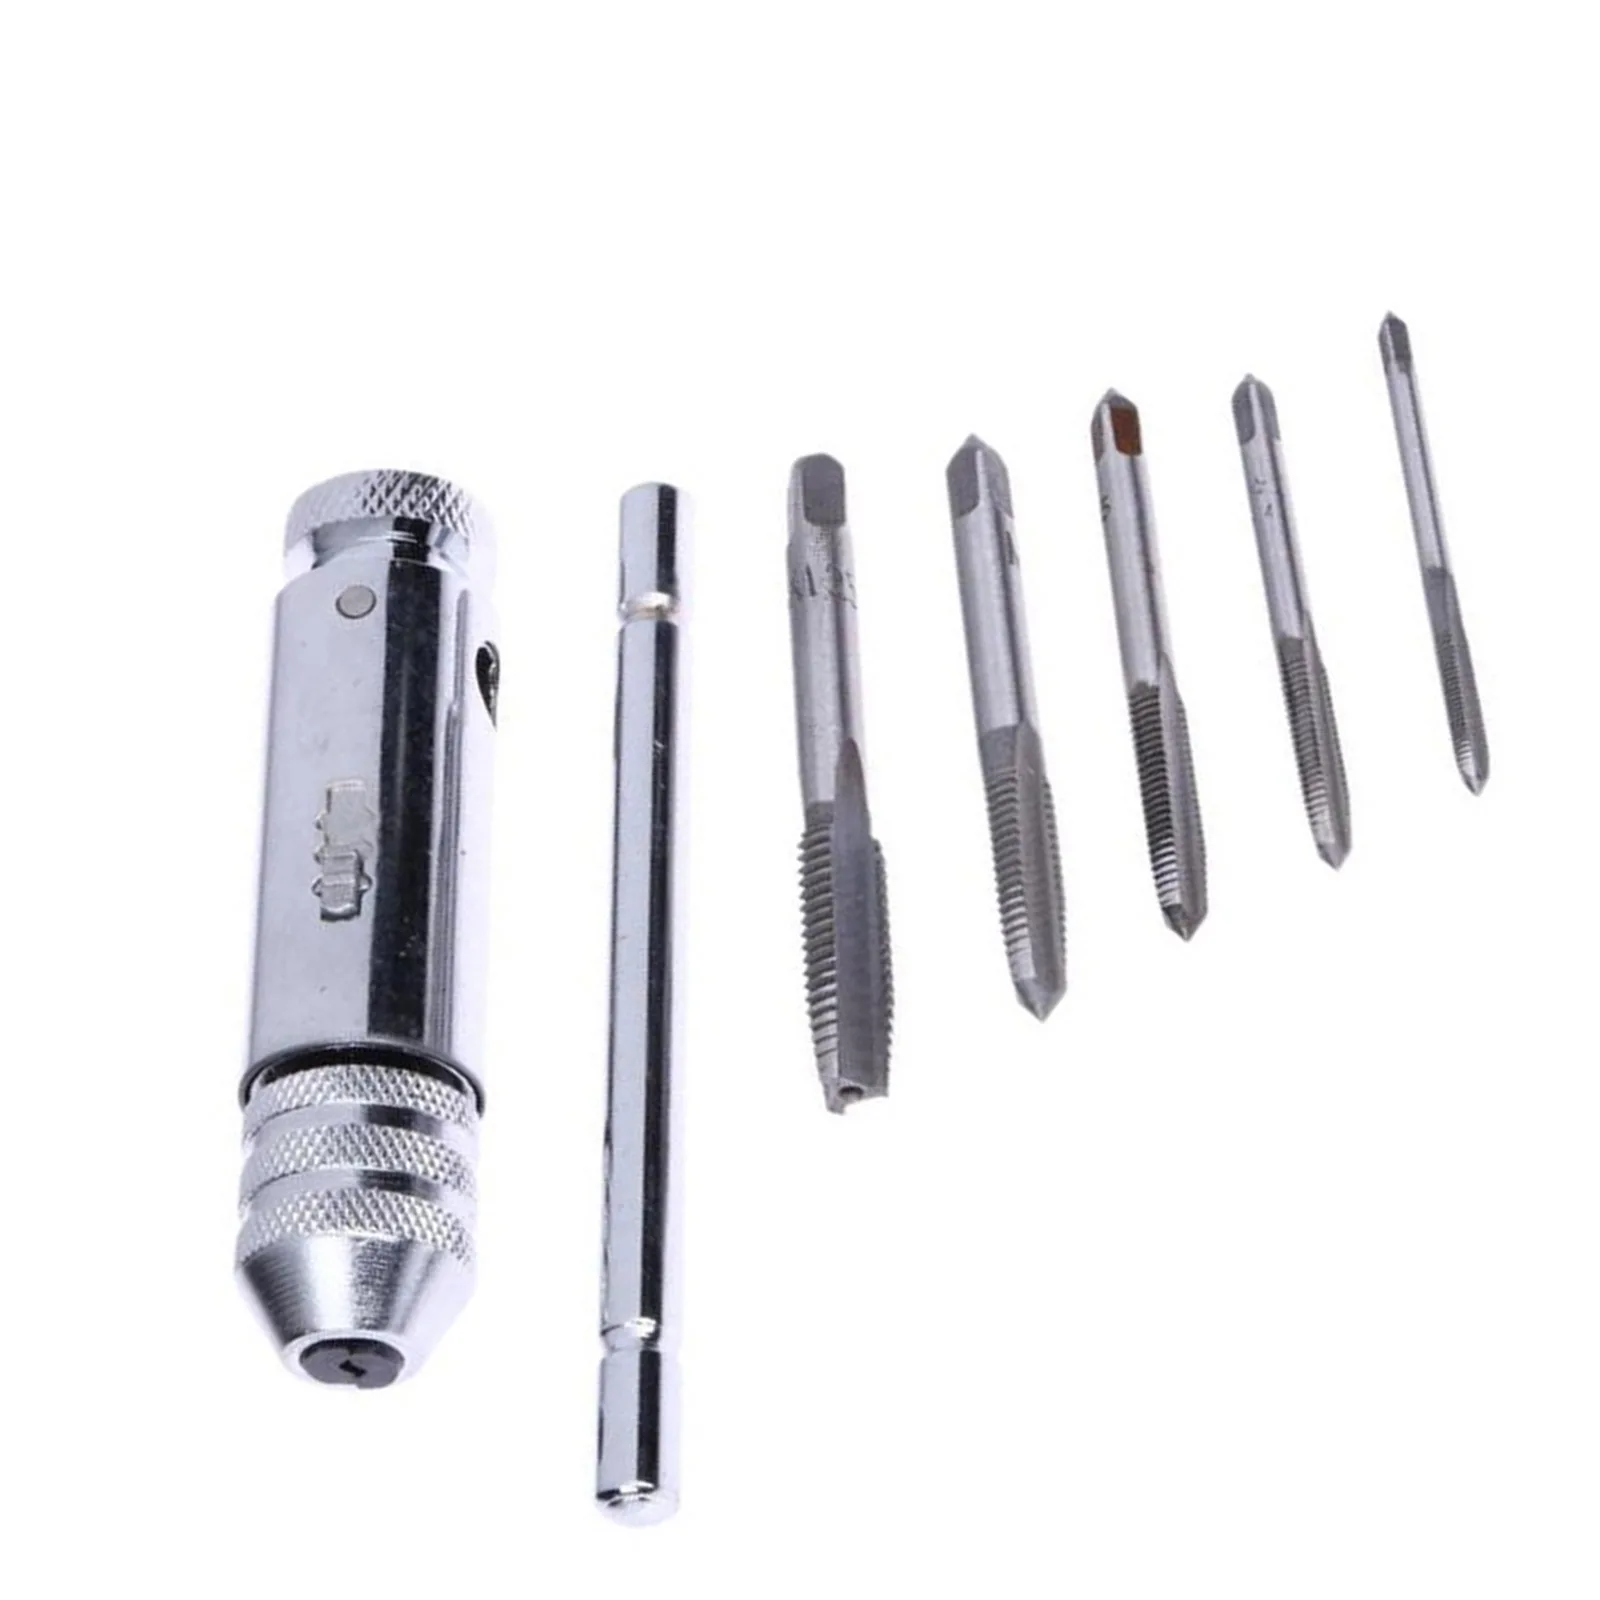 

Adjustable Silver T-Handle Ratchet Tap Holder Wrench Set Hand Tools With 5pc M3-M8 Machine Screw Thread Metric Plug T-shaped Tap